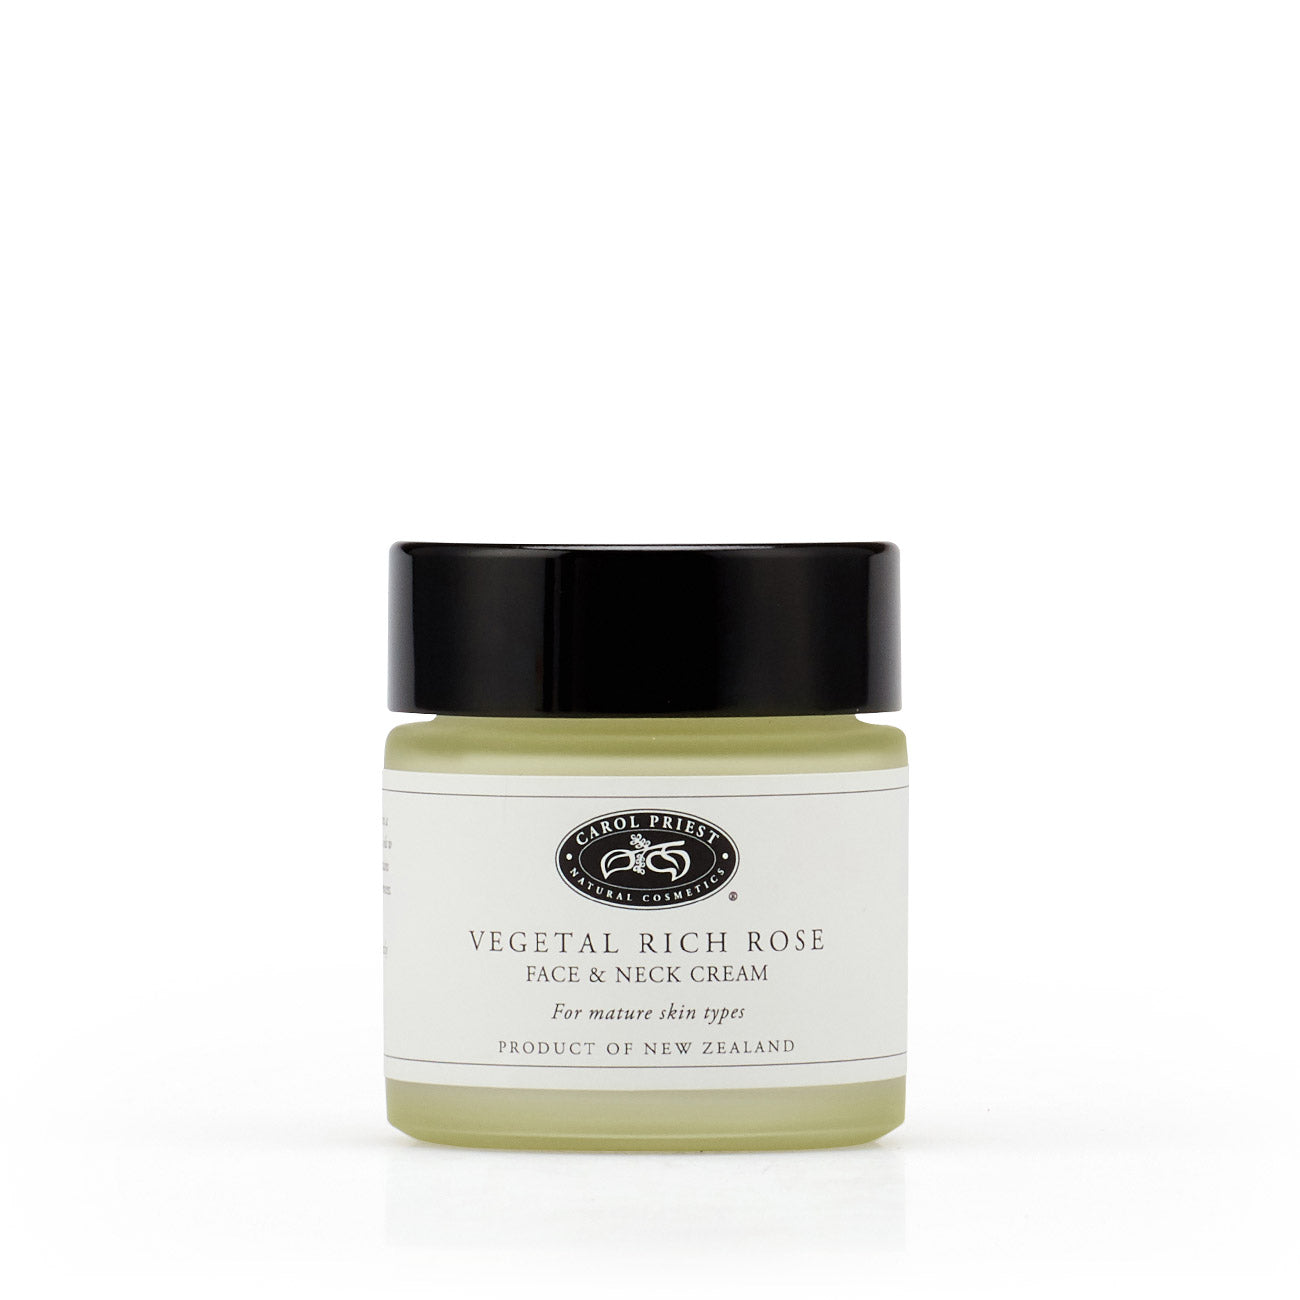 photo showcasing the front of vegetal rich rose face &amp; neck cream by Carol Priest, a natural, organic cosmetic